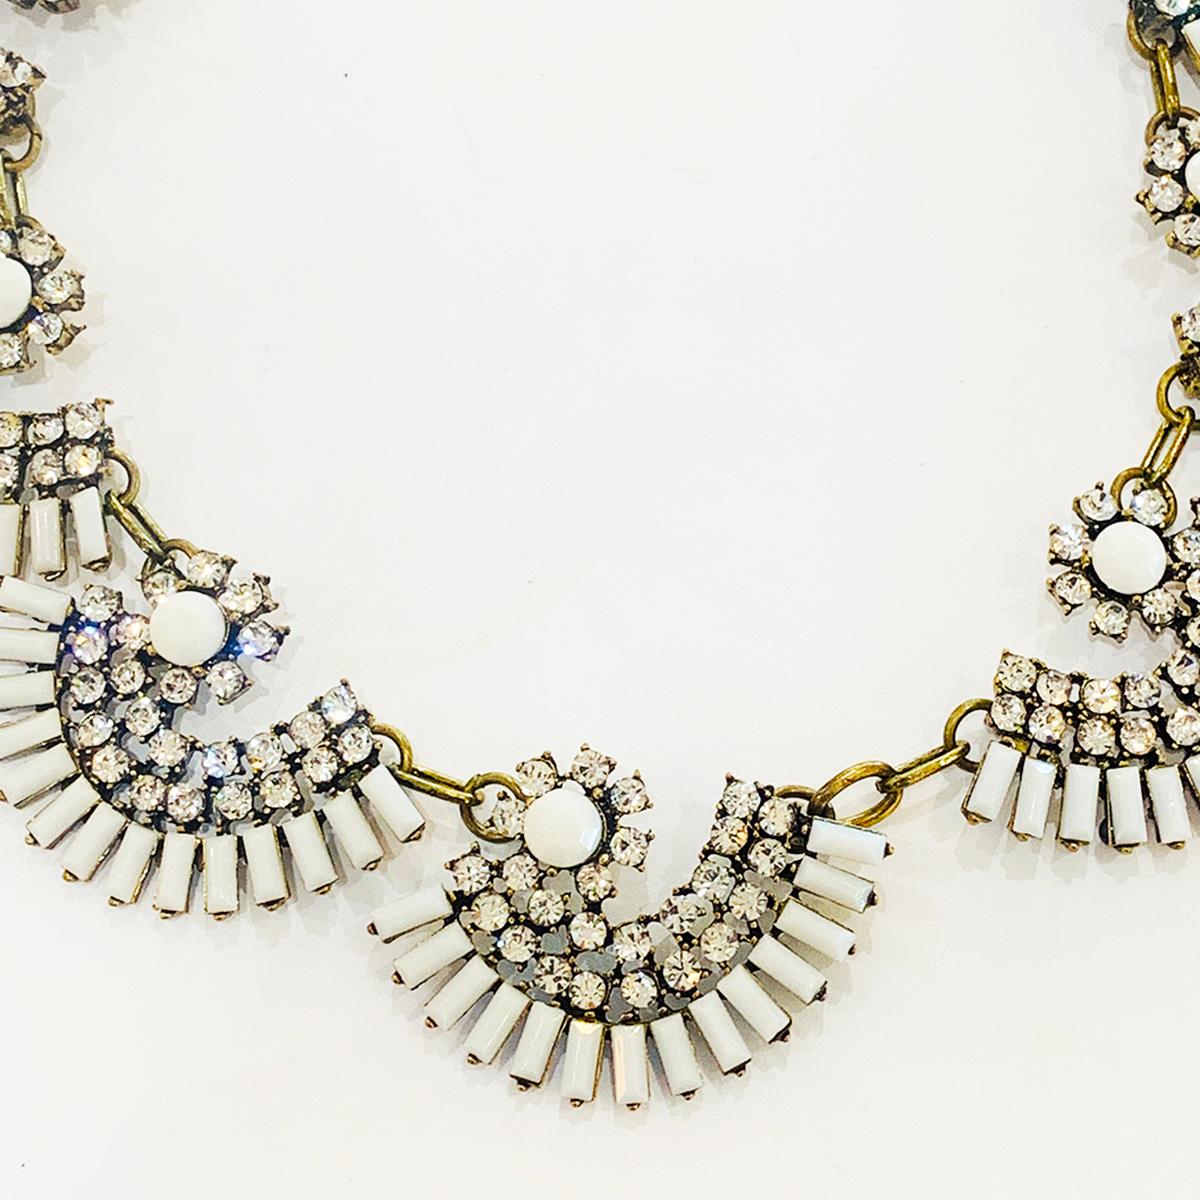 An Oscar De La Renta Necklace in Milk Glass and white Diamantes on an aged gilt ground. Totally perfect with no damage, no repairs , no losses. The necklace is adjustable so the length can be change to suit either the neck size or the front dress